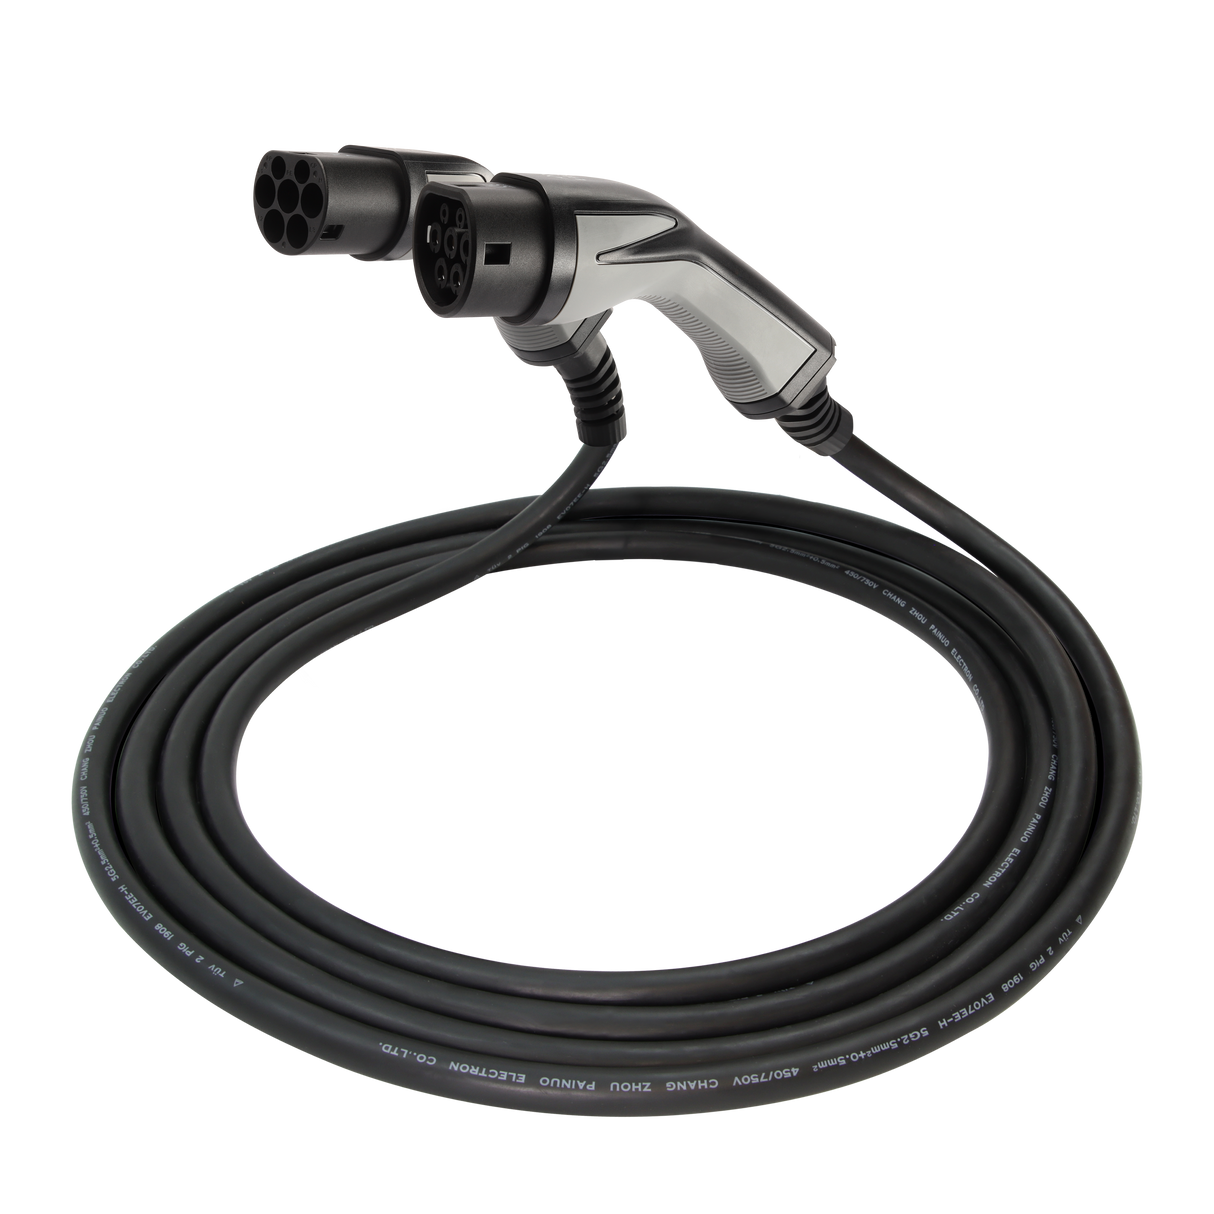 Charging cable Fiat 600E - Erock Pro Type 2 - 16A 3 phase (11 kW)